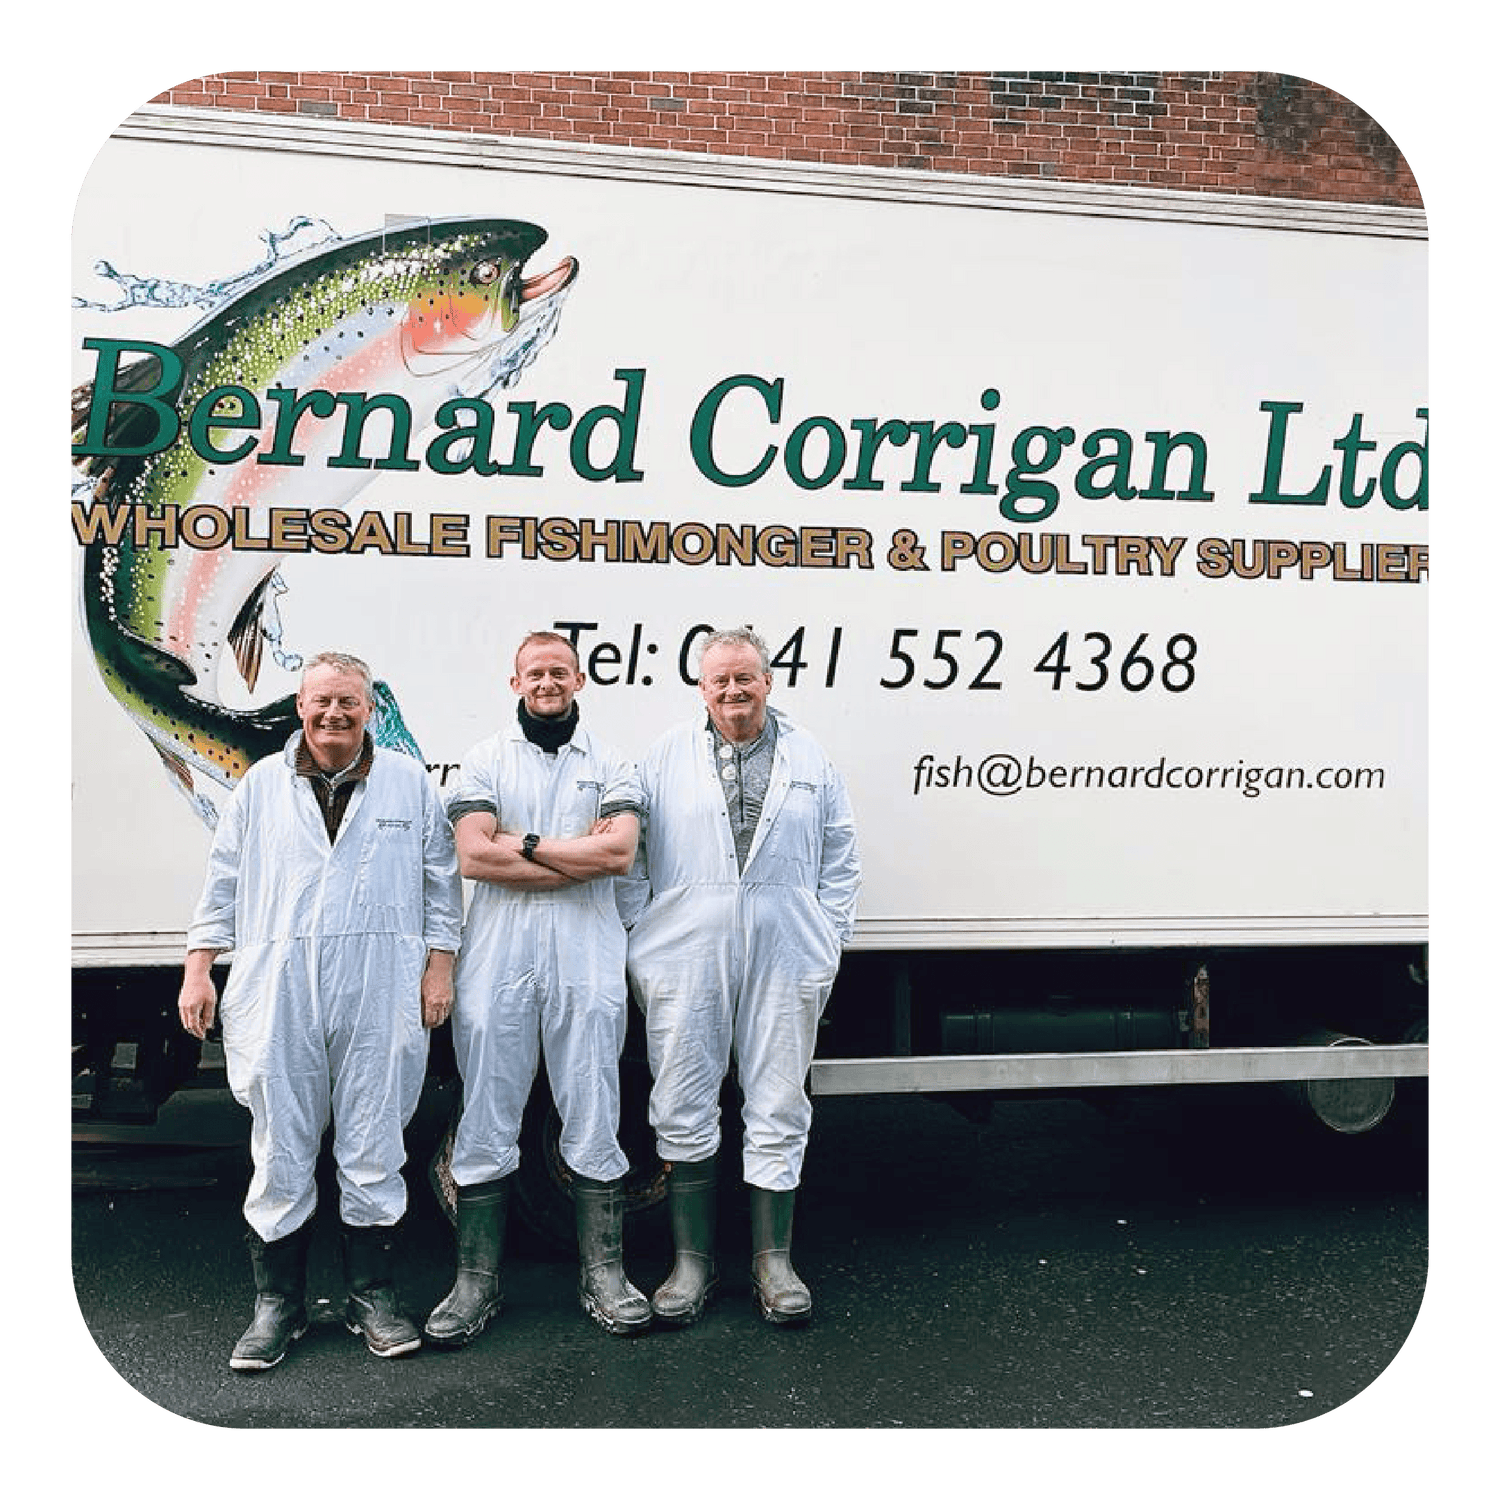 Members of the Bernard Corrigan team standing in front of their branded home-delivery truck.